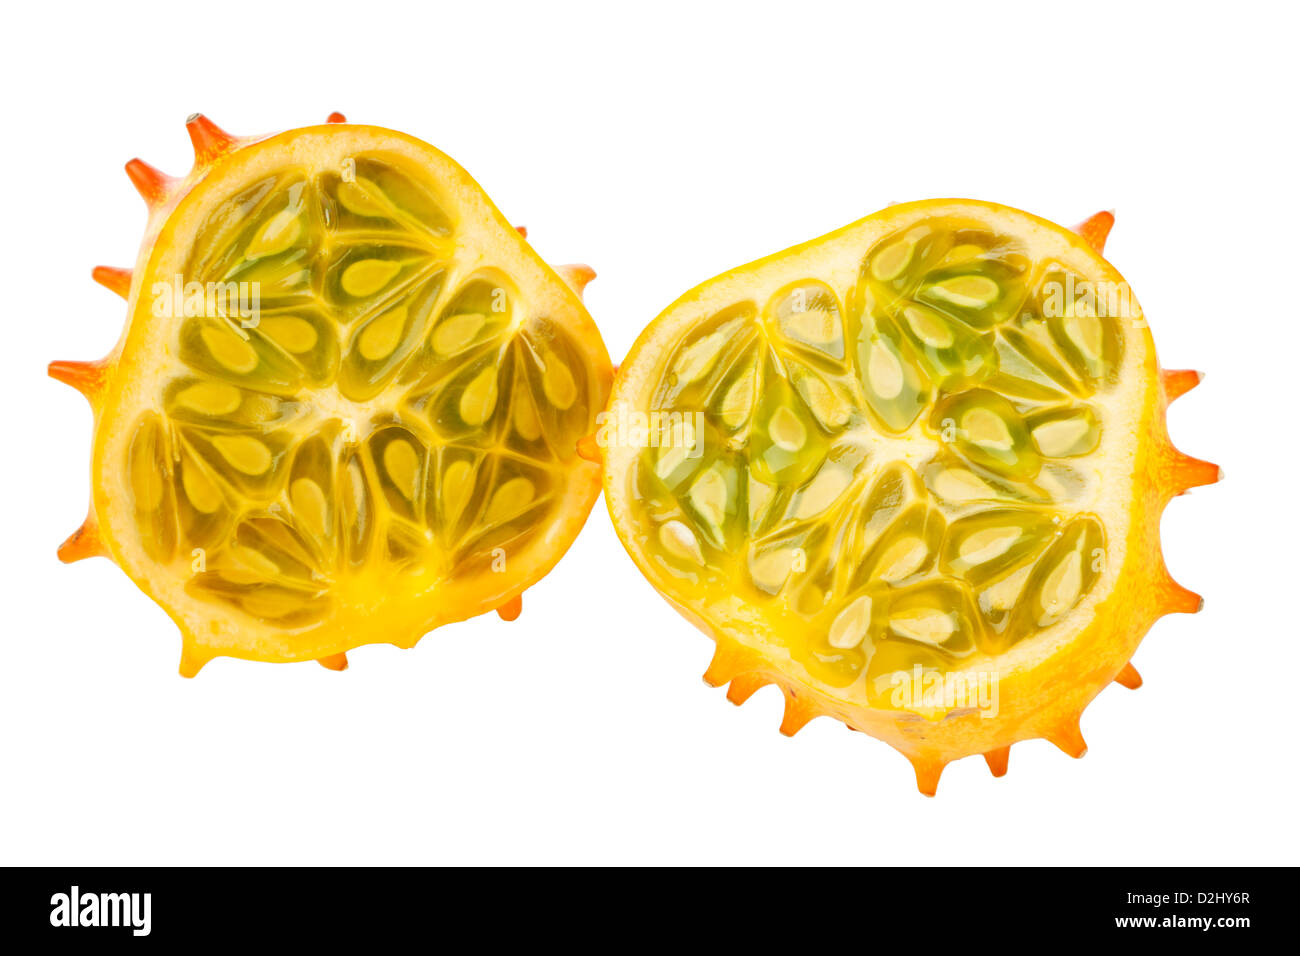 Halved Kiwano fruit, also called African Horned melon or Horned Cucumber, isolated on white background Stock Photo